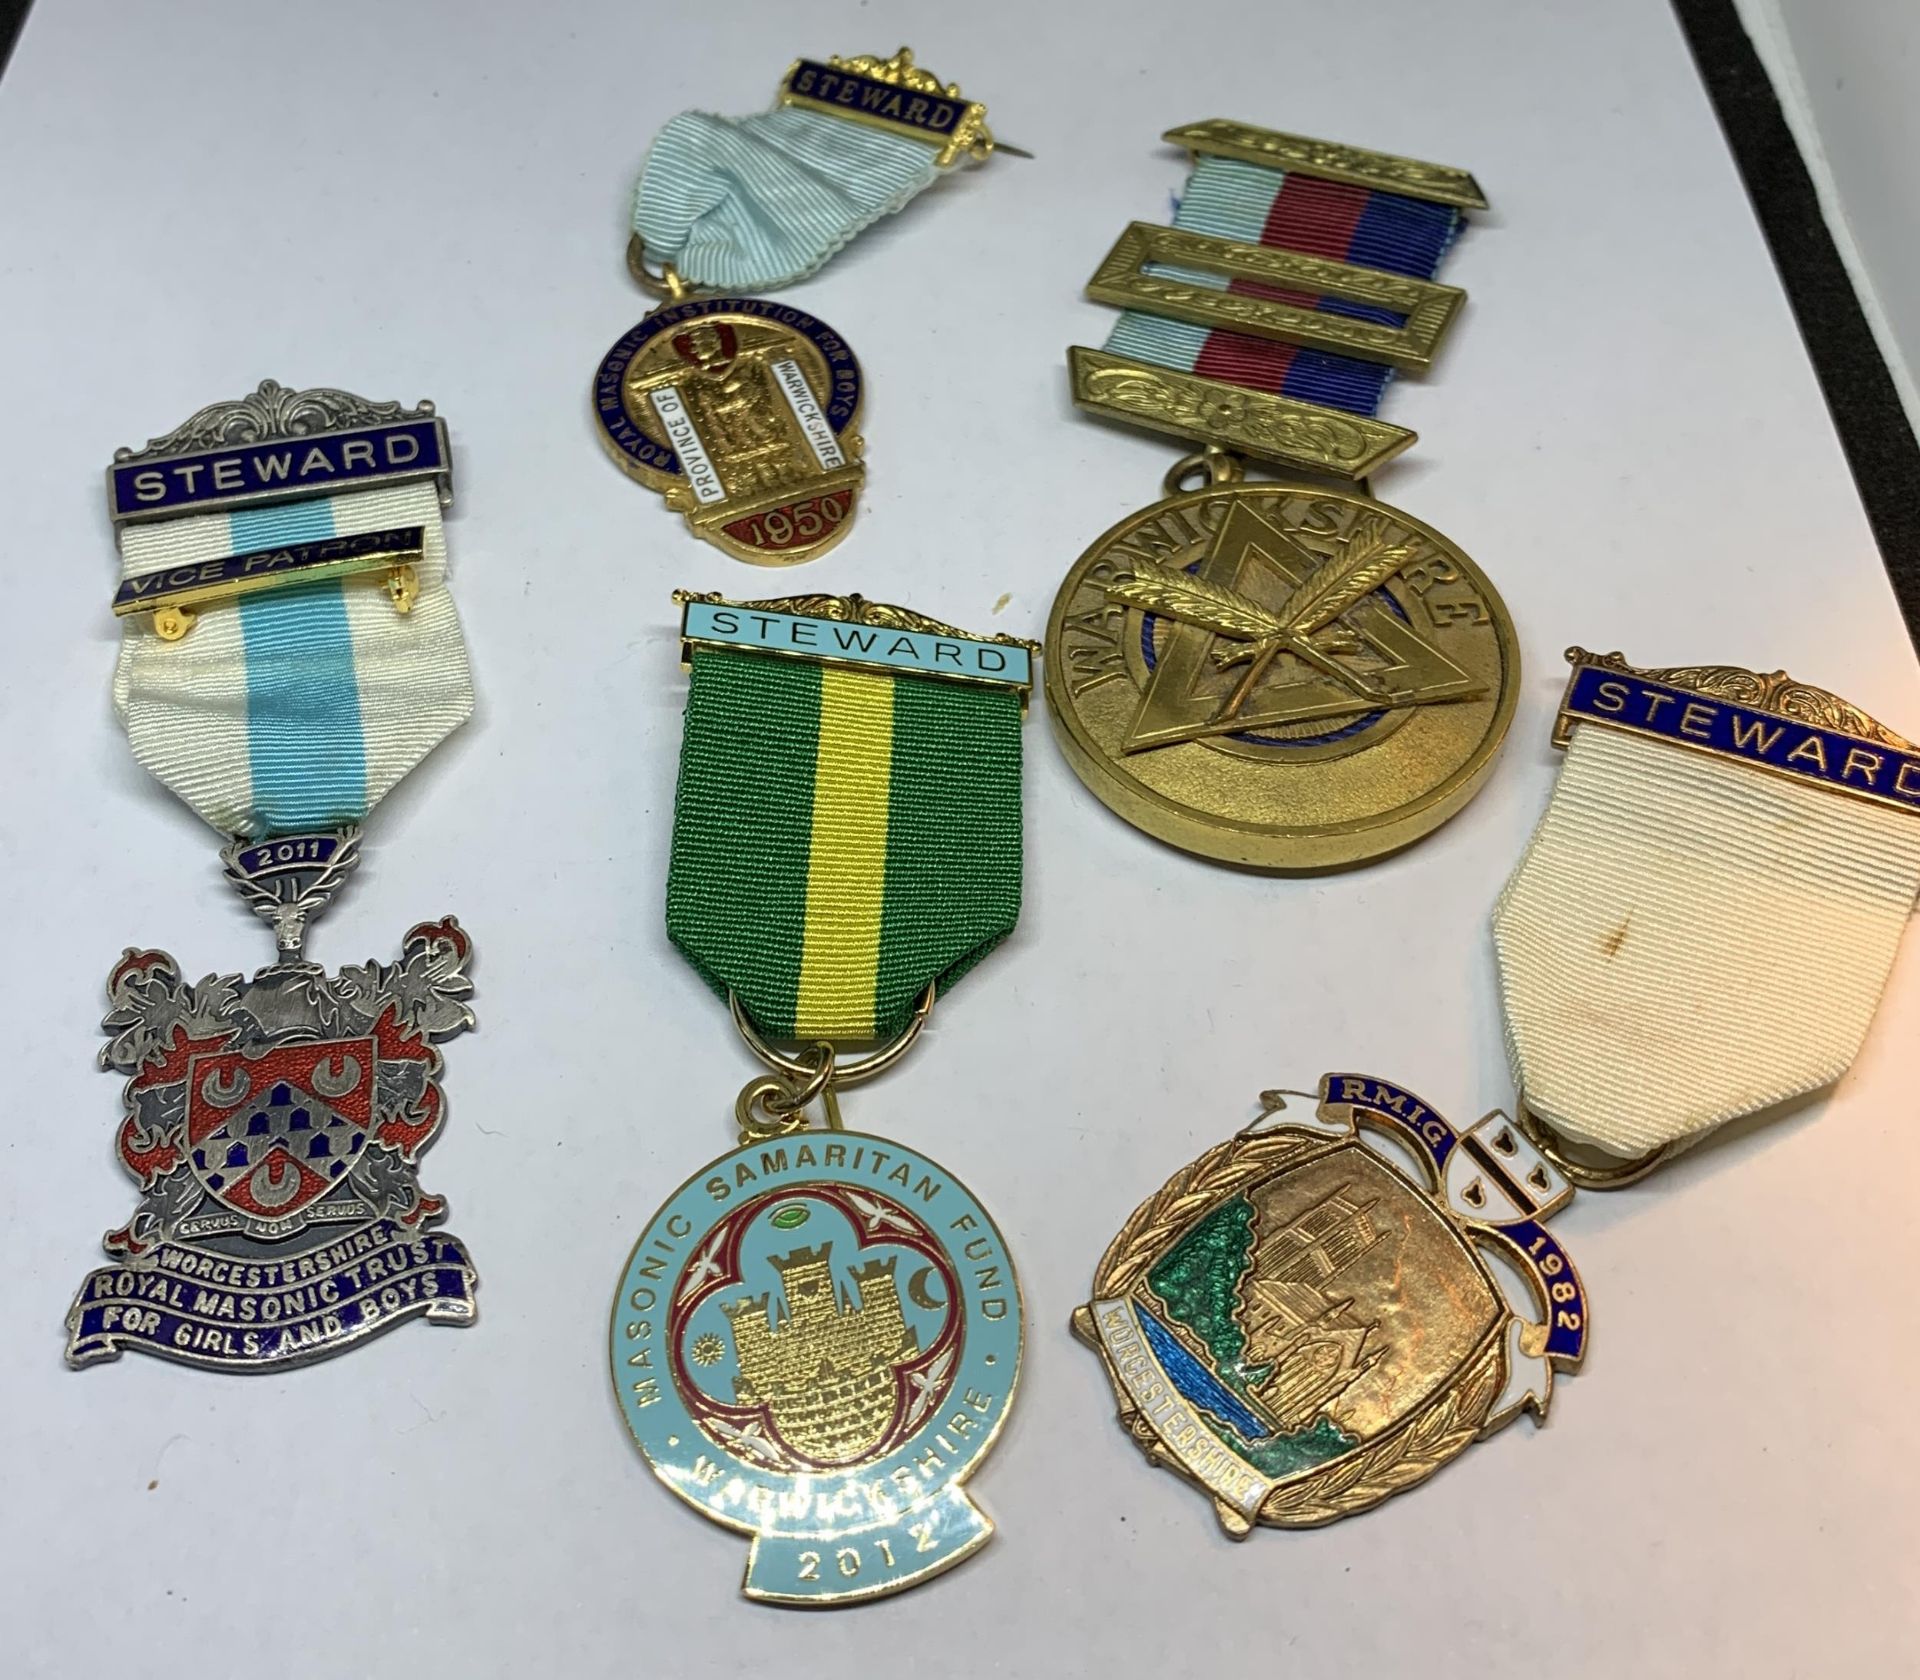 FIVE VARIOUS MASONIC MEDALS ON RIBBONS